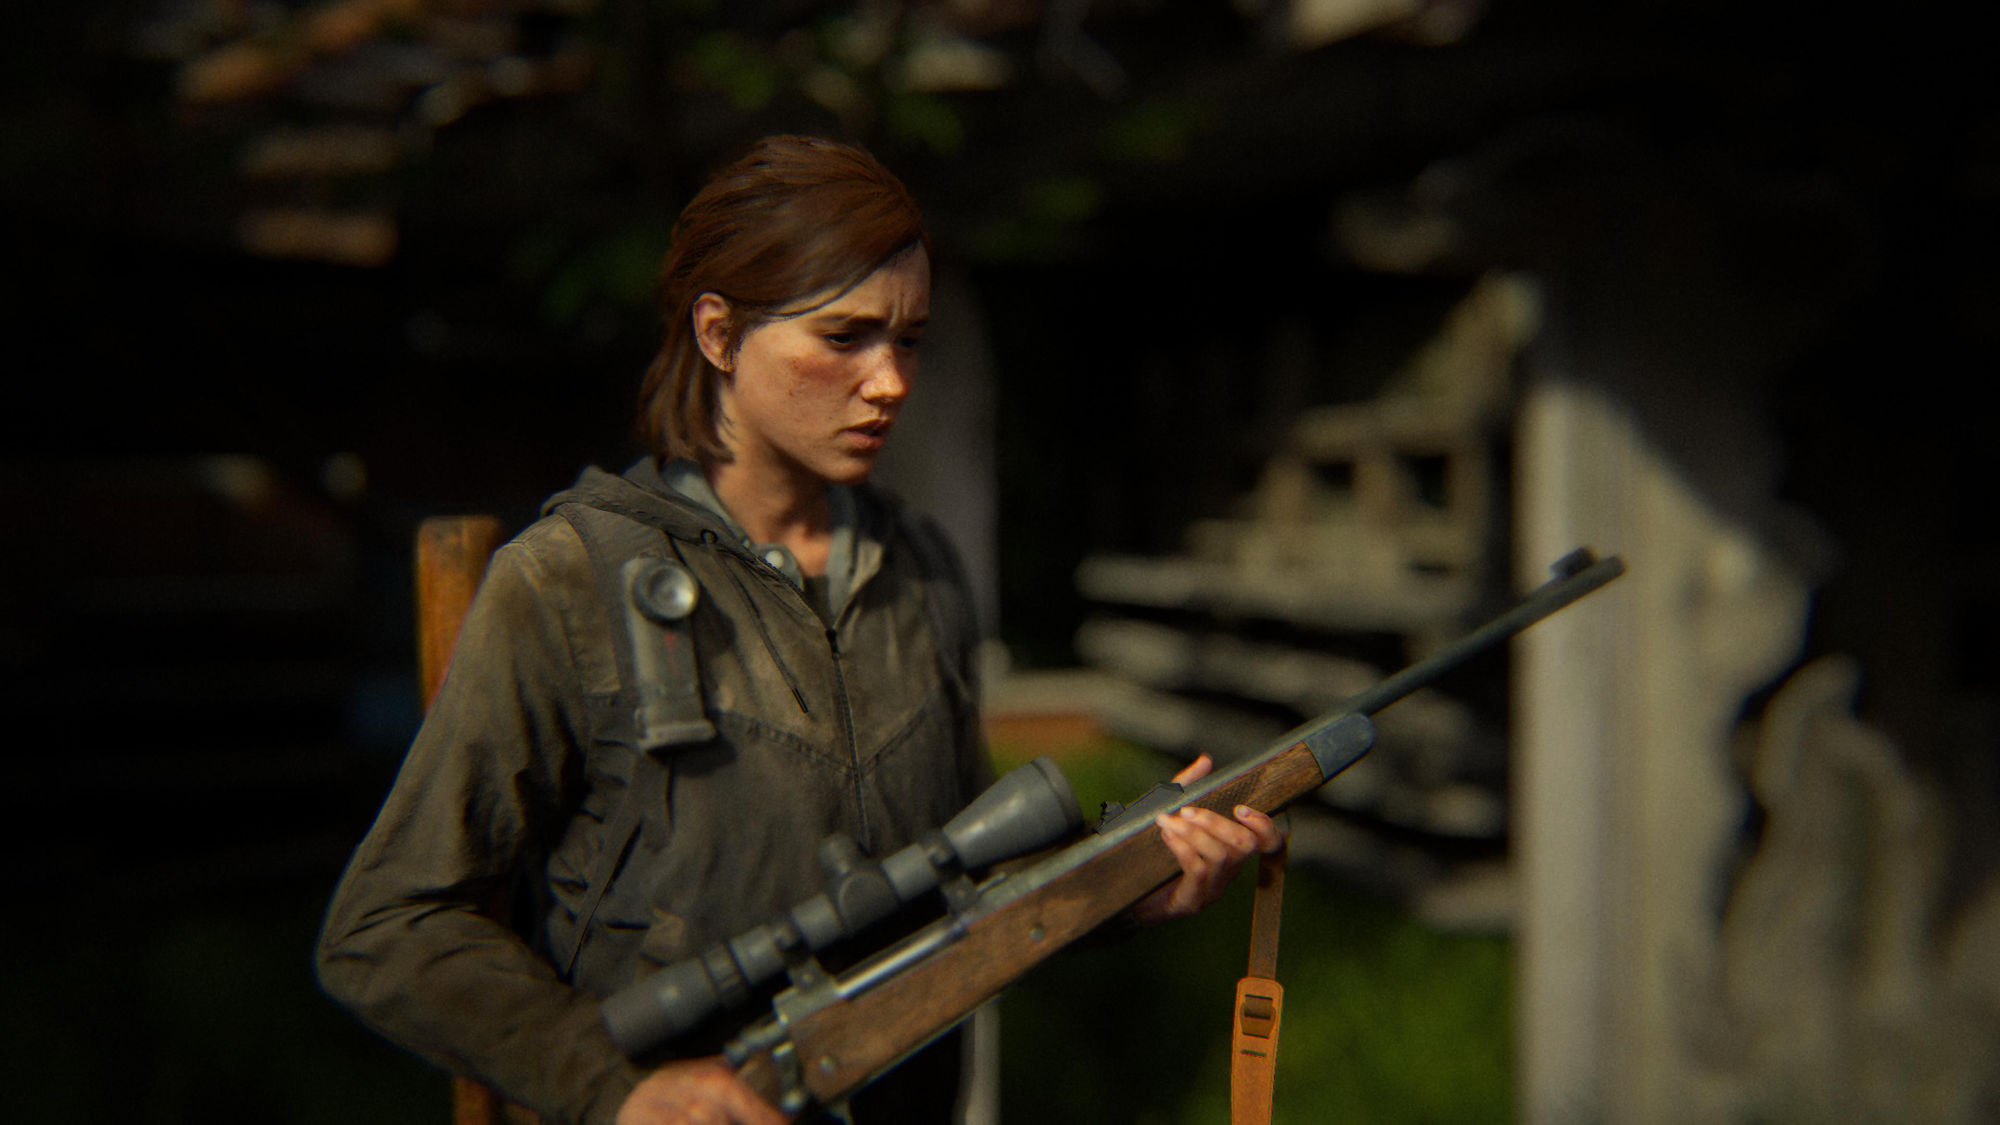 Ellie from The Last of Us Part2, holding a rifle, looking down with a sincere expression